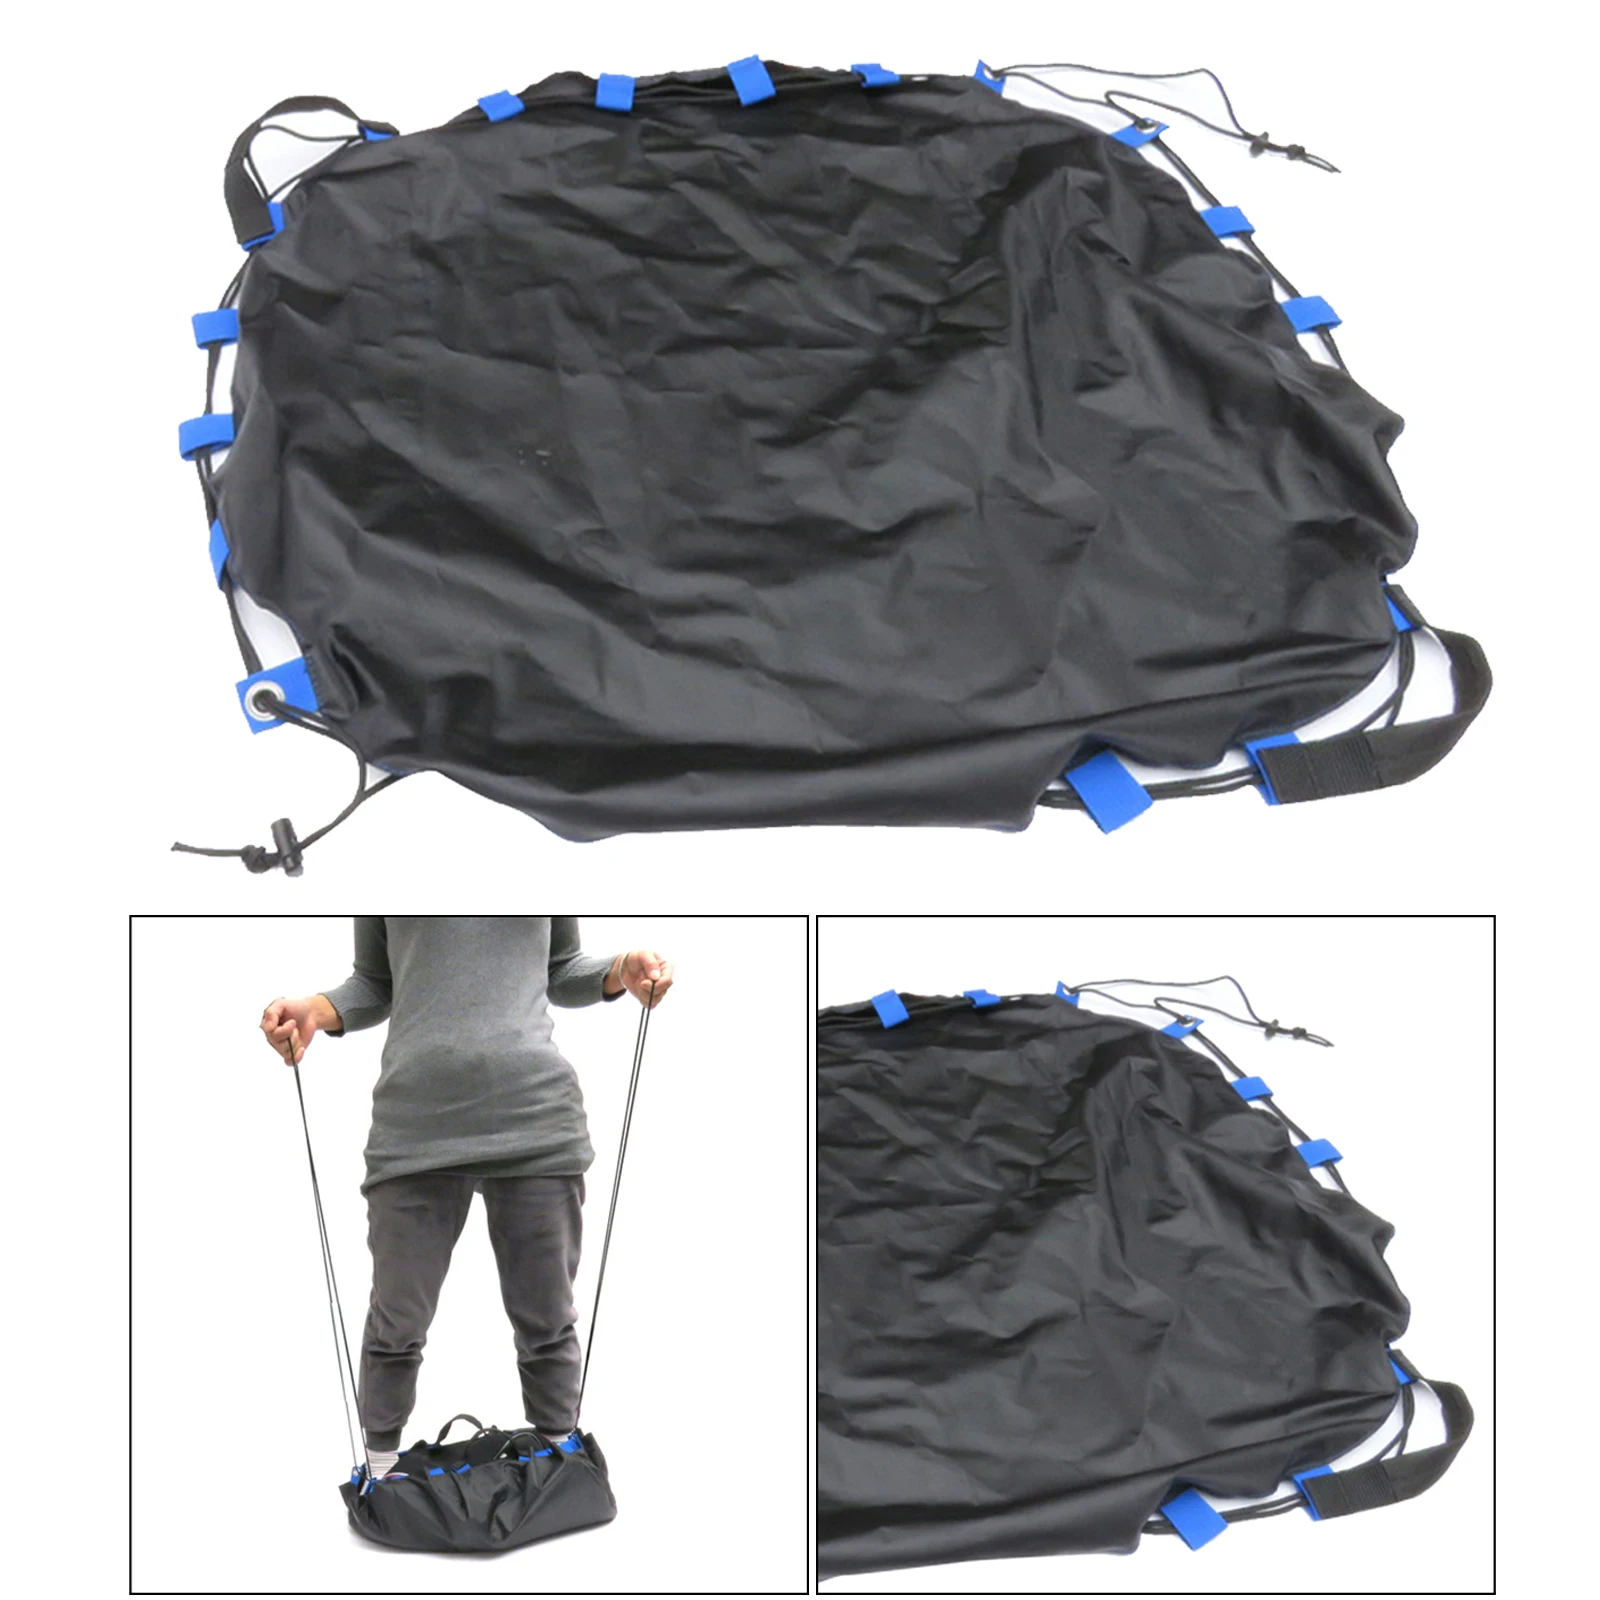 Portable Surf Changing Mat, Waterproof Wetsuit Change Mat Dry Bag for Surfing, Swimming, Scuba Diving, Water Sports